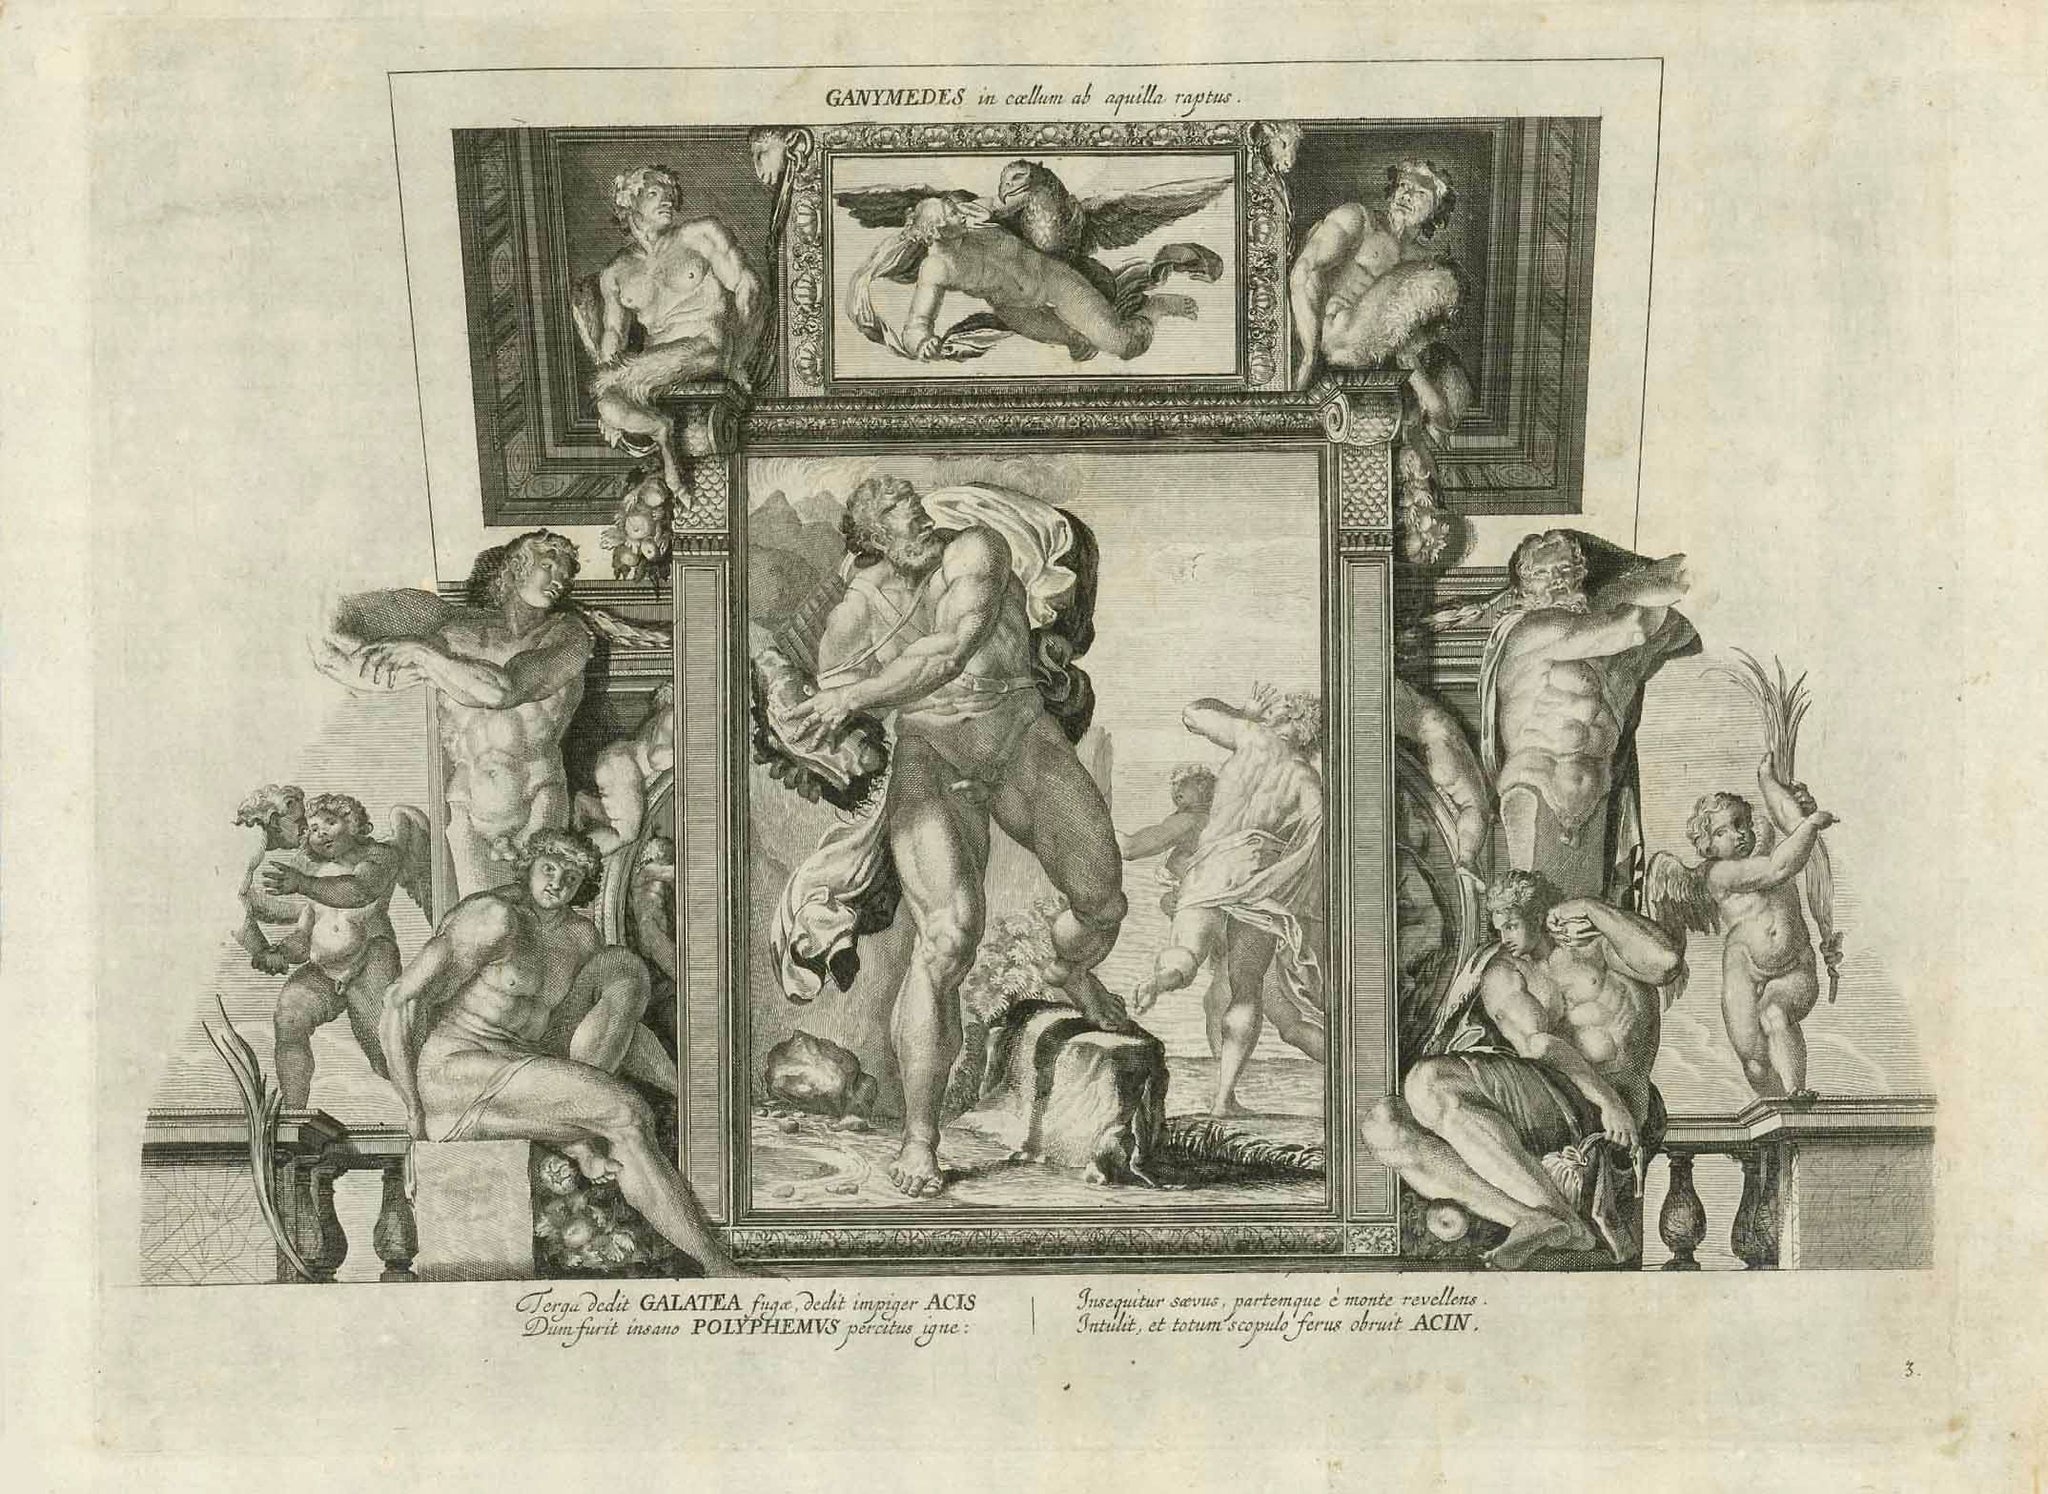 "Terga dedit Galatea fugae, dedit impiger Acis - Dum furitinsano Polyphemus percitus igneÉ"  This copper etching after the wall fresco painted by Annibale Carracci in the Galleria Farnese in Rome is not signed by an engraver. It was executed ca. 1750 and published as plate nr. 5 in an album about the wall frescos by Carracci (1560-1609) in the Villa Farnese.  Cyclope Polyphemis, who was the lover of Galatea was enraged when he found out that Galatea had another lover: Acis. He picked up a rock and threw it 